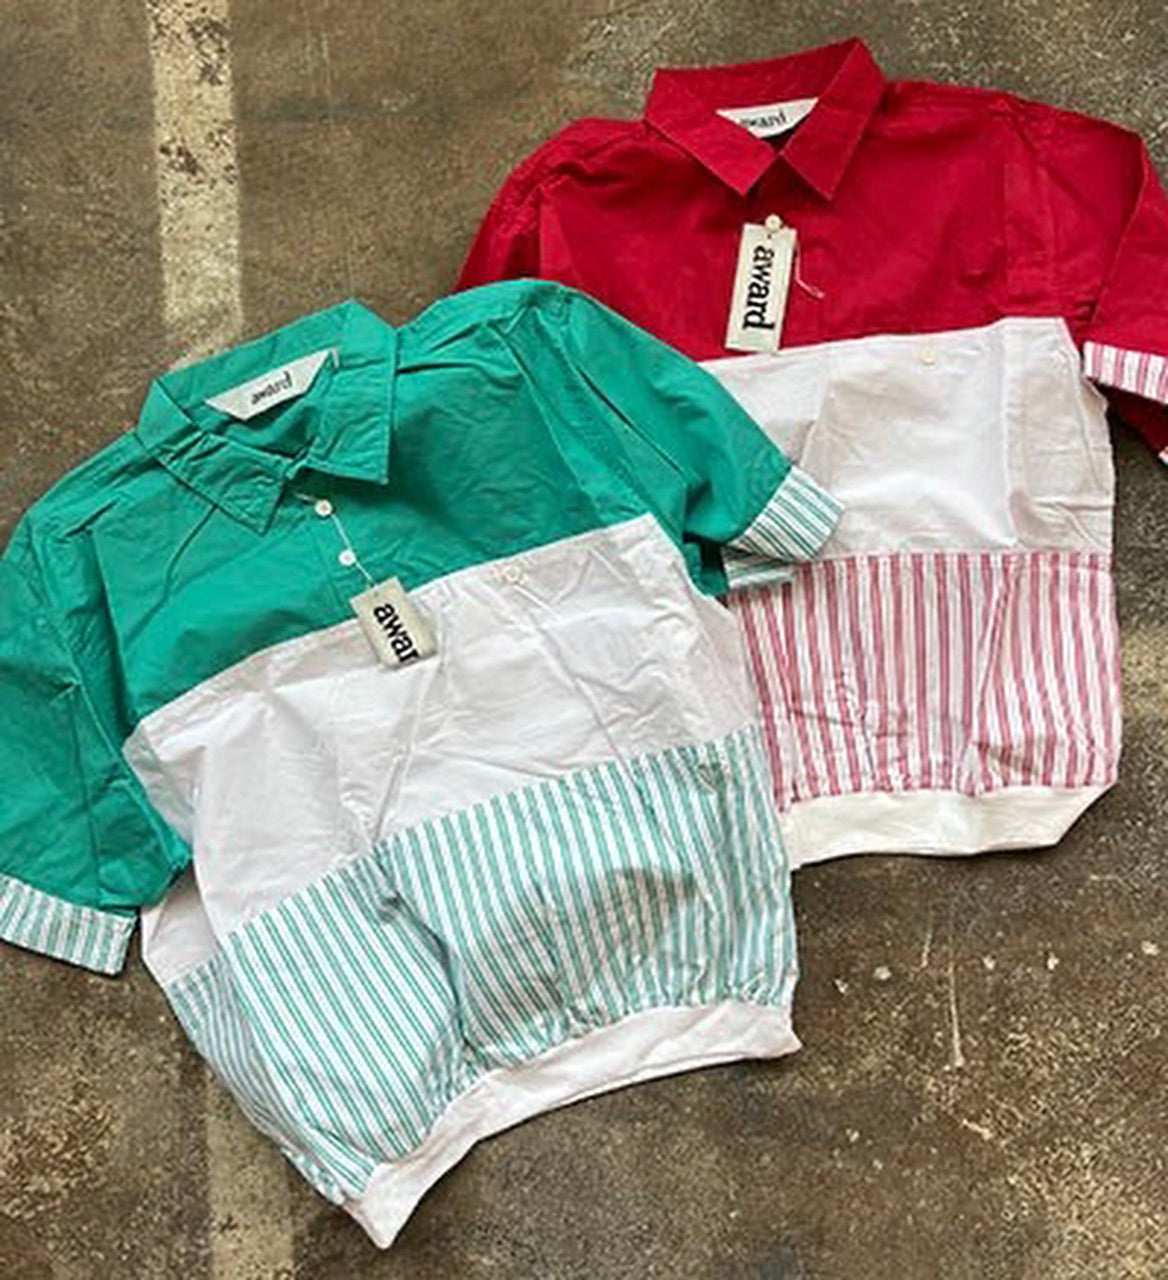 Deadstock (never worn) Mens 1980s/90s shortsleeve shirts (30 pieces)